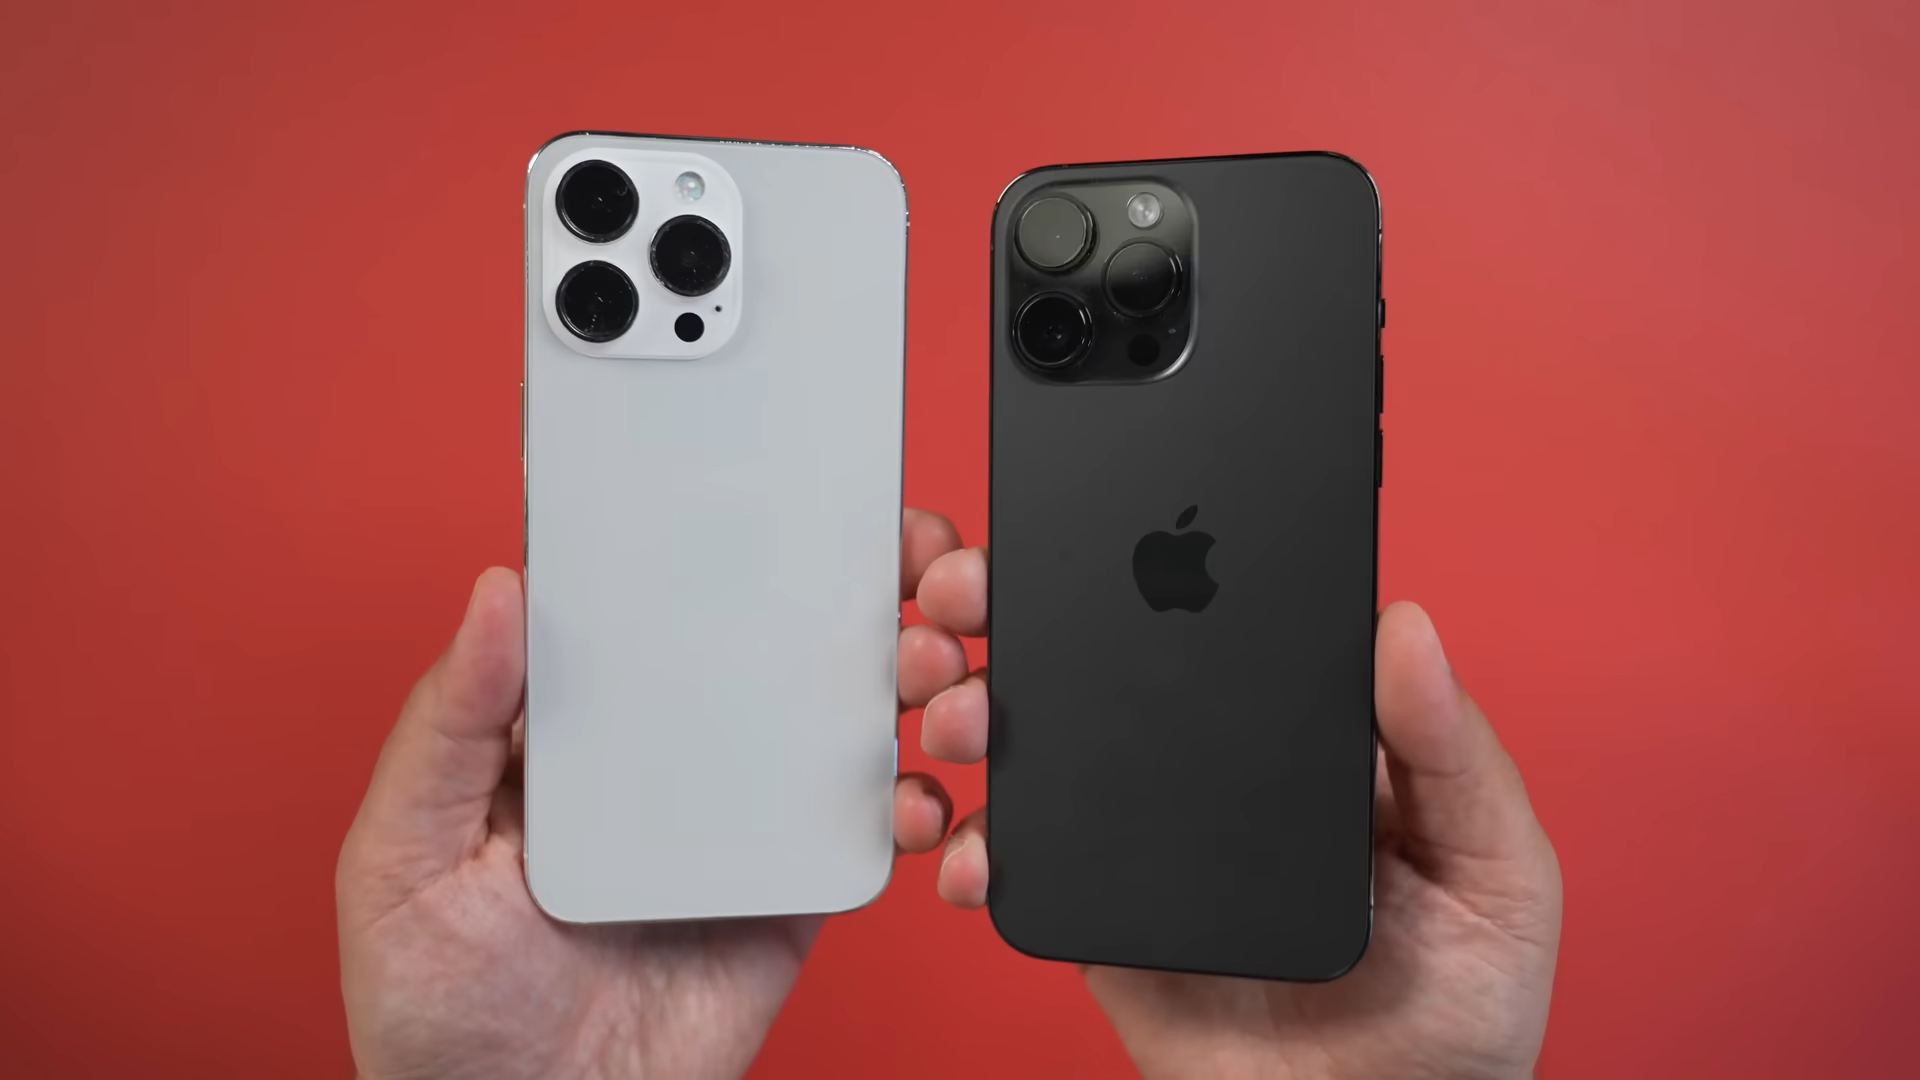 Dummy units show us all iPhone 15 & iPhone 15 Pro colors: video